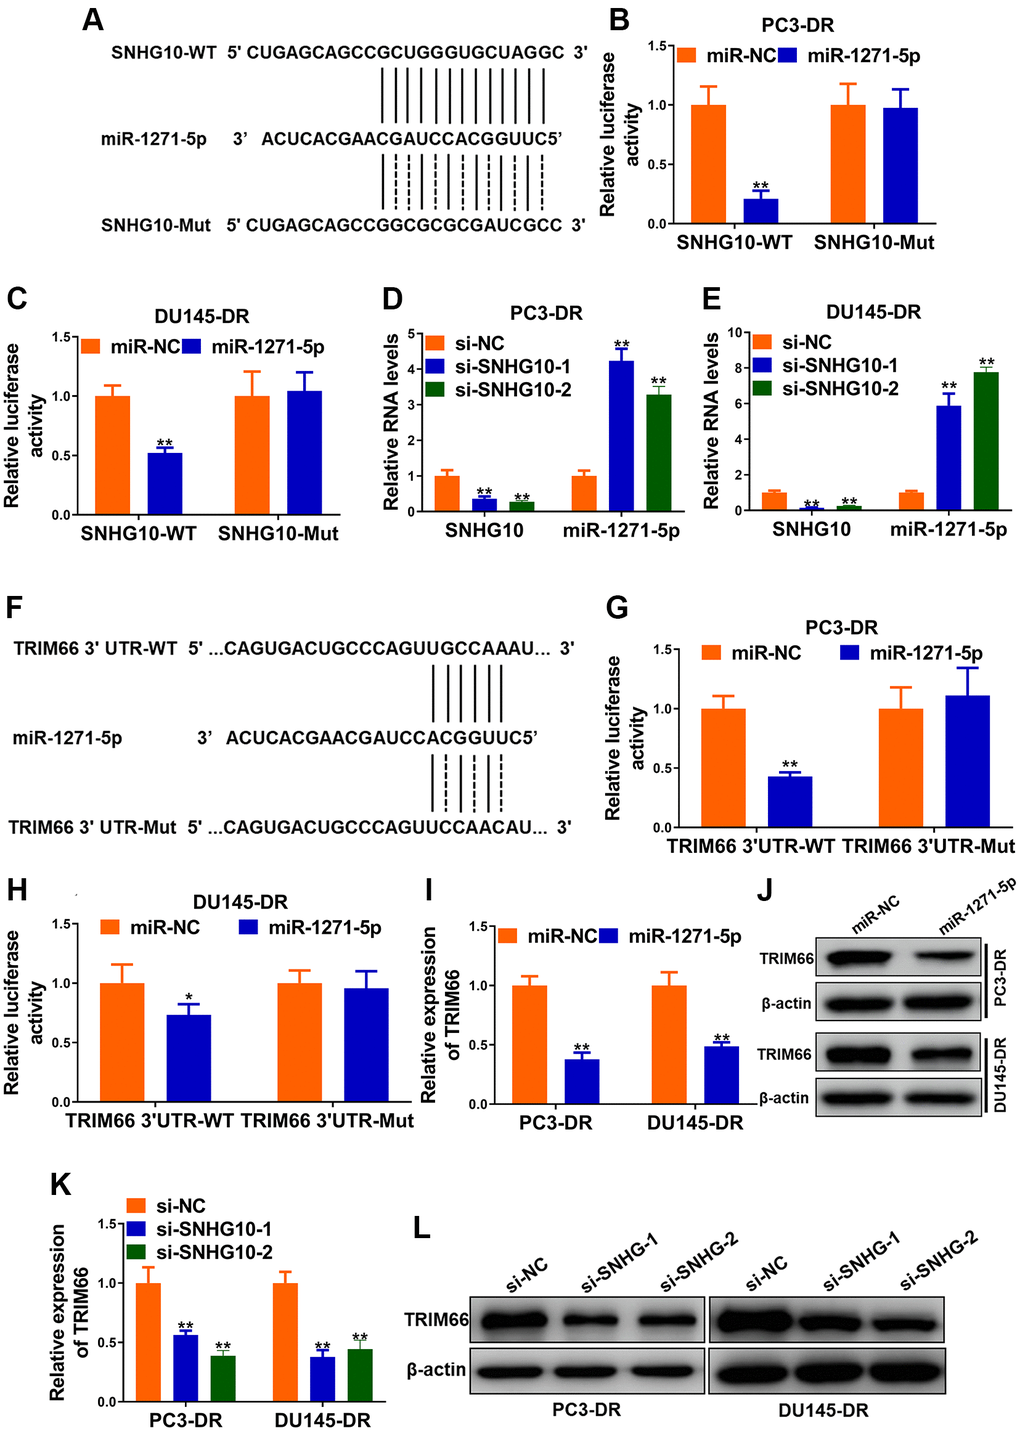 SNHG10 up-regulated TRIM66 via sponging miR-1271-5p. (A) miR-1271-5p binding sites in SNHG10 and site mutagenesis. (B and C) Luciferase activity in PC3-DR and DU145-DR cells. (D and E) RNA levels of SNHG10 and miR-1271-5p in PC3-DR and DU145-DR cells transfected with siRNAs against SNHG10 (si-SNHG10-1 and si-SNHG10-2) or negative control siRNAs (si-NC) were detected by qRT-PCR. (F) miR-1271-5p binding sites in TRIM66 3’UTR and site mutagenesis. (G and H) Relative luciferase activity in PC3-DR and DU145-DR cells. (I and J) mRNA and protein level of TRIM66 in PC3-DR and DU145-DR cells transfected with miR-1271-5p mimics or mimics negative control (miR-NC) were determined by qRT-PCR and Western blot. (K and L) mRNA and protein level of TRIM66 in PC3-DR and DU145-DR cells transfected with siRNAs against SNHG10 (si-SNHG10-1 and si-SNHG10-2) or negative control siRNAs (si-NC) were determined by qRT-PCR and Western blot. Values are mean ± SD. *P **P 